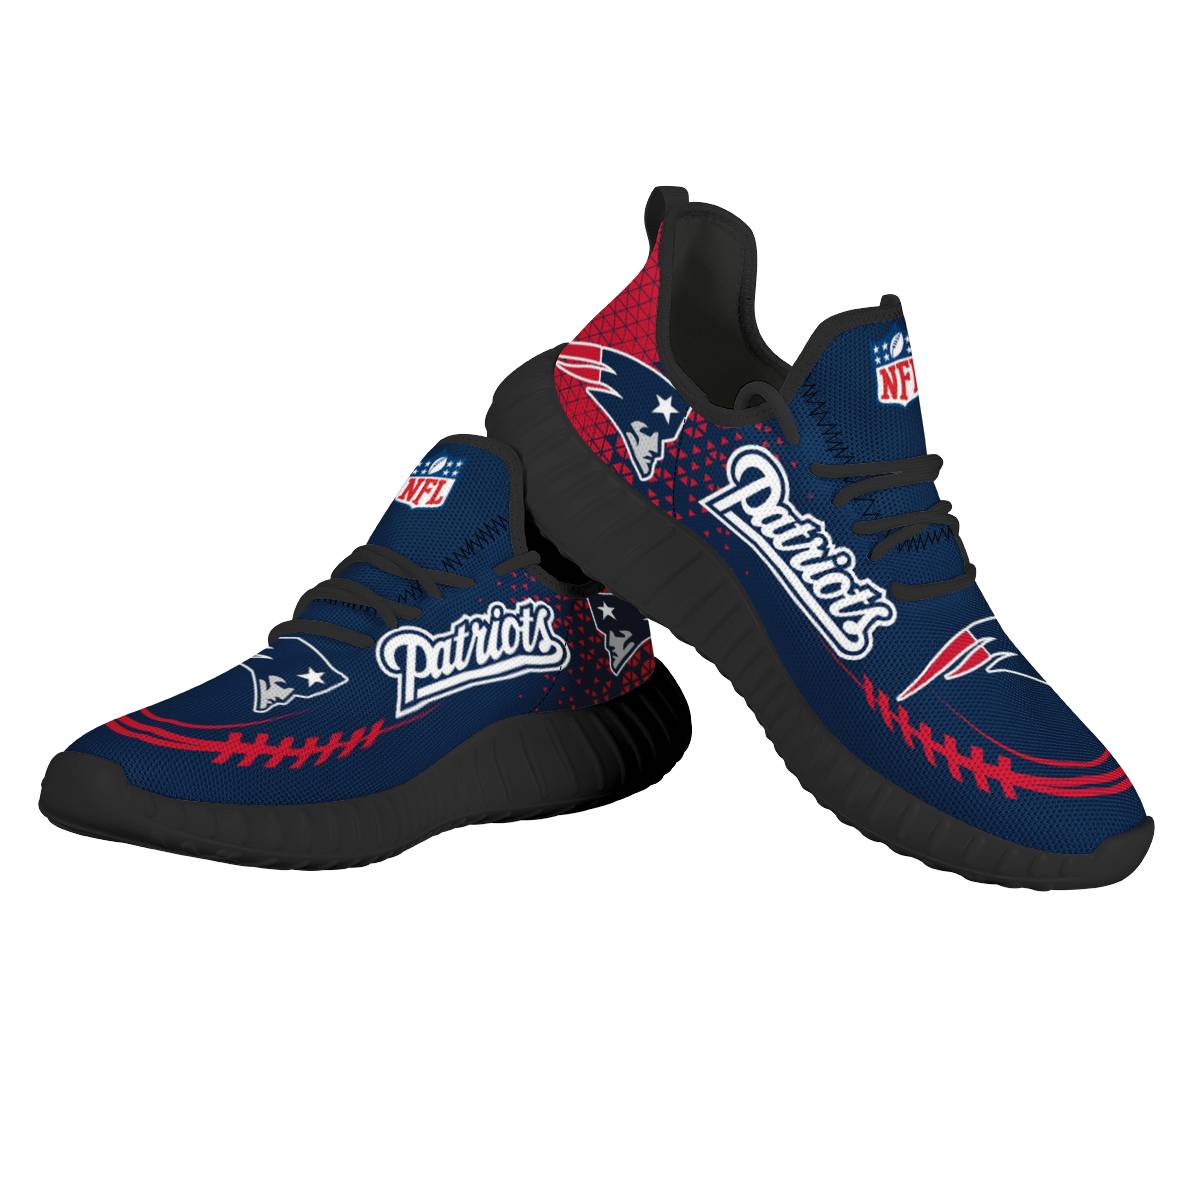 Women's NFL New England Patriots Mesh Knit Sneakers/Shoes 001